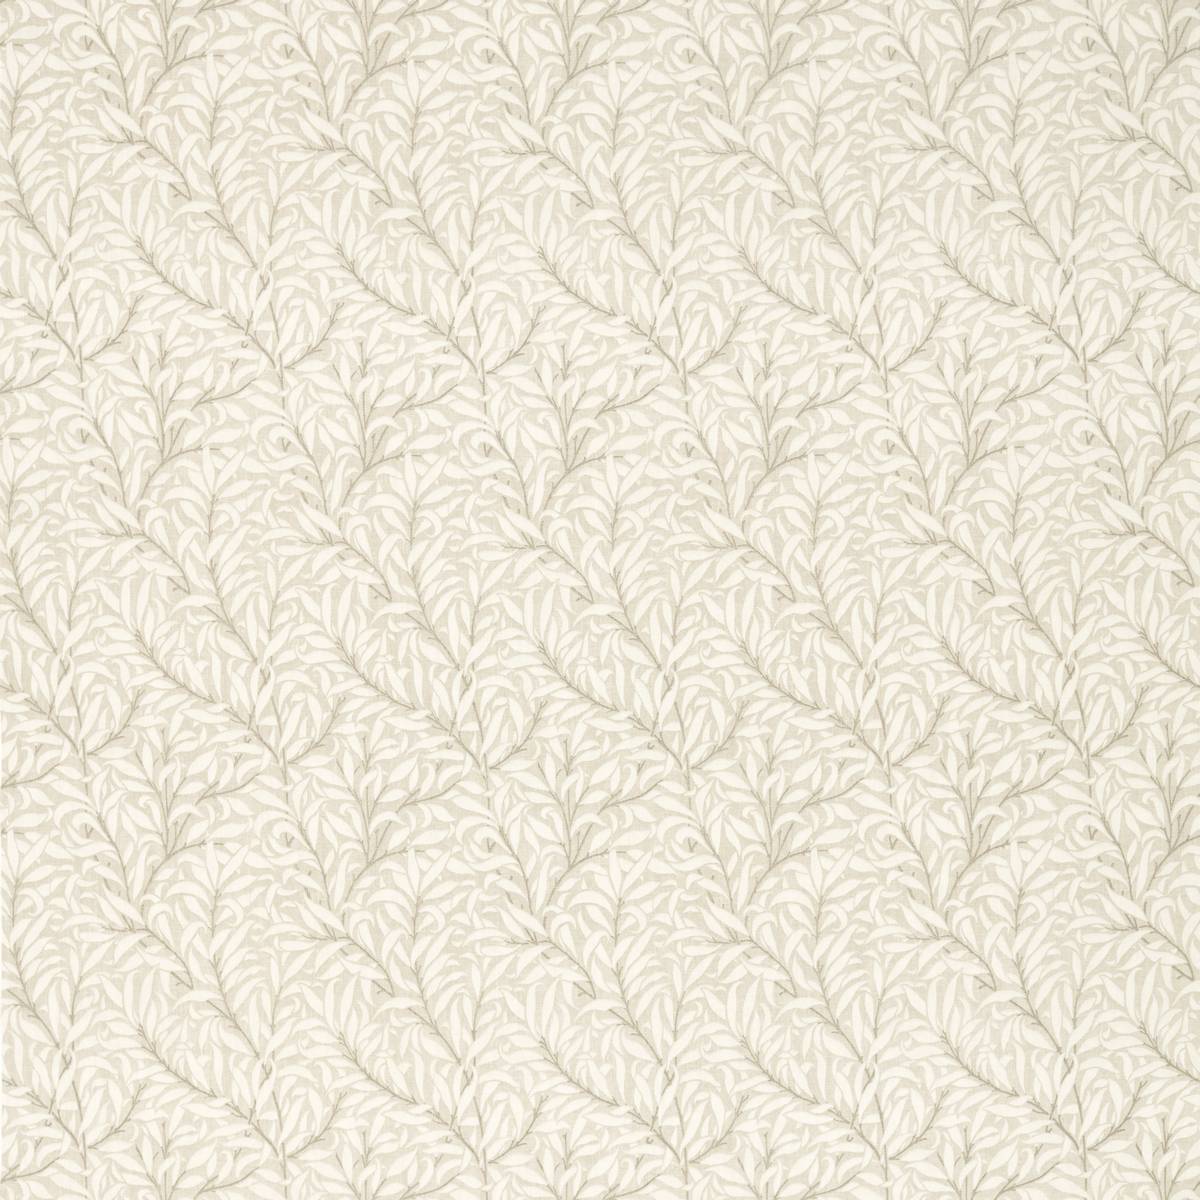 Pure Willow Boughs Print Linen Fabric by William Morris & Co.